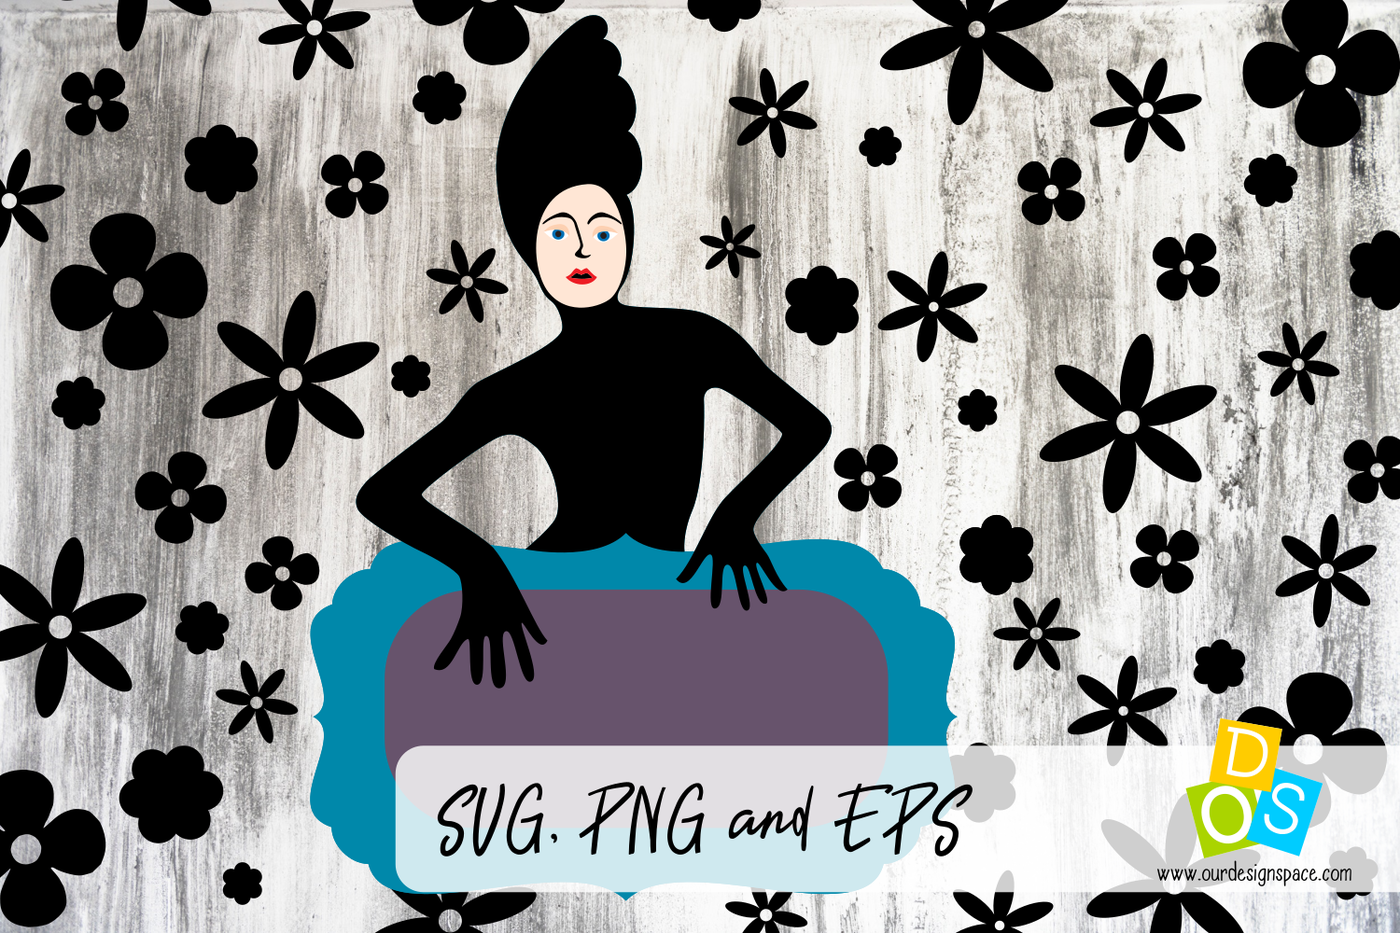 Woman In Black Svg Png And Eps By Our Design Space Thehungryjpeg Com